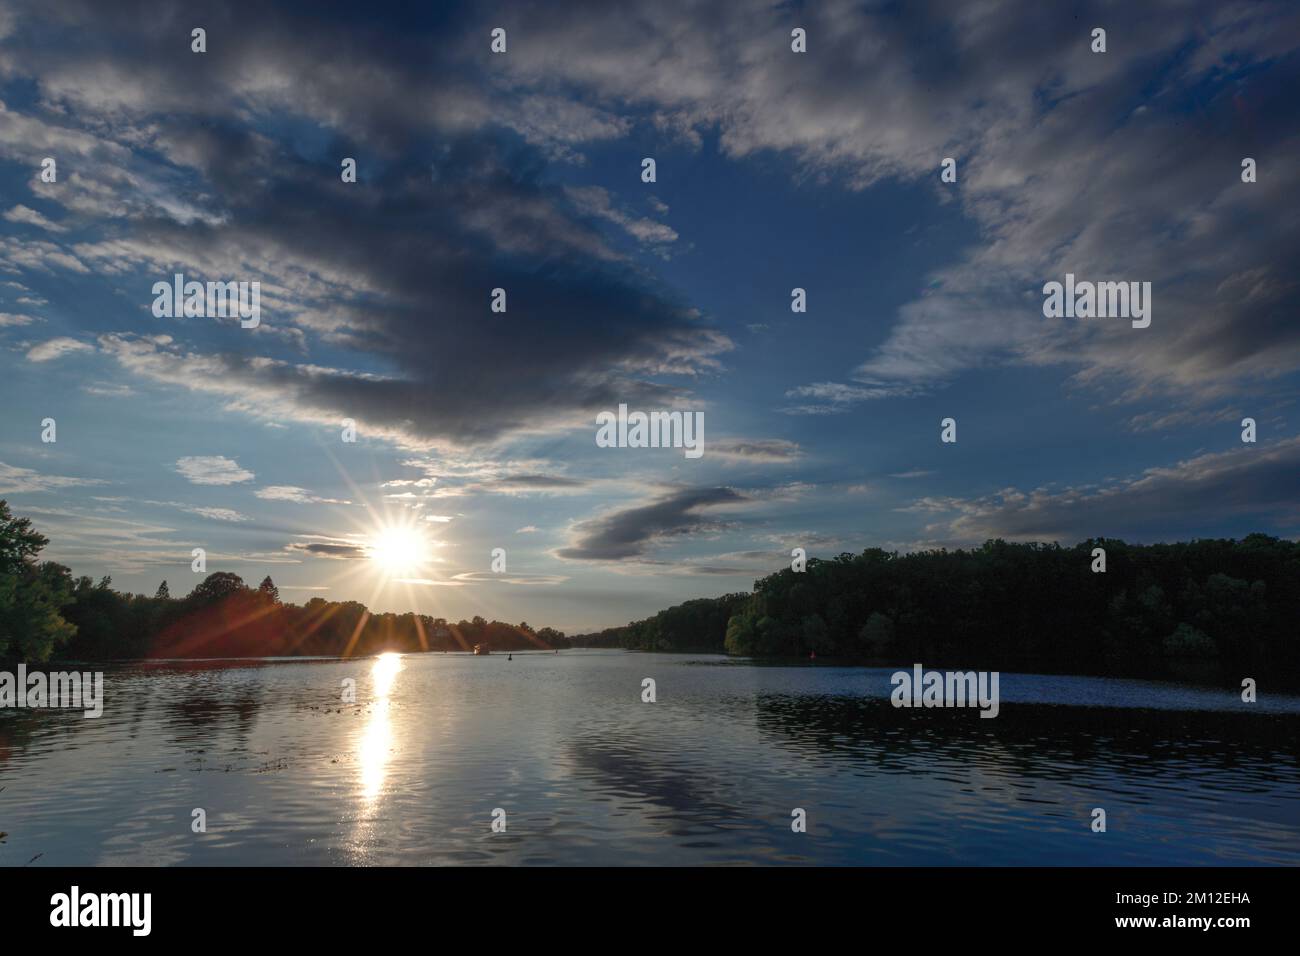 View over Griebnitzsee lake in Potsdam to sunset Stock Photo